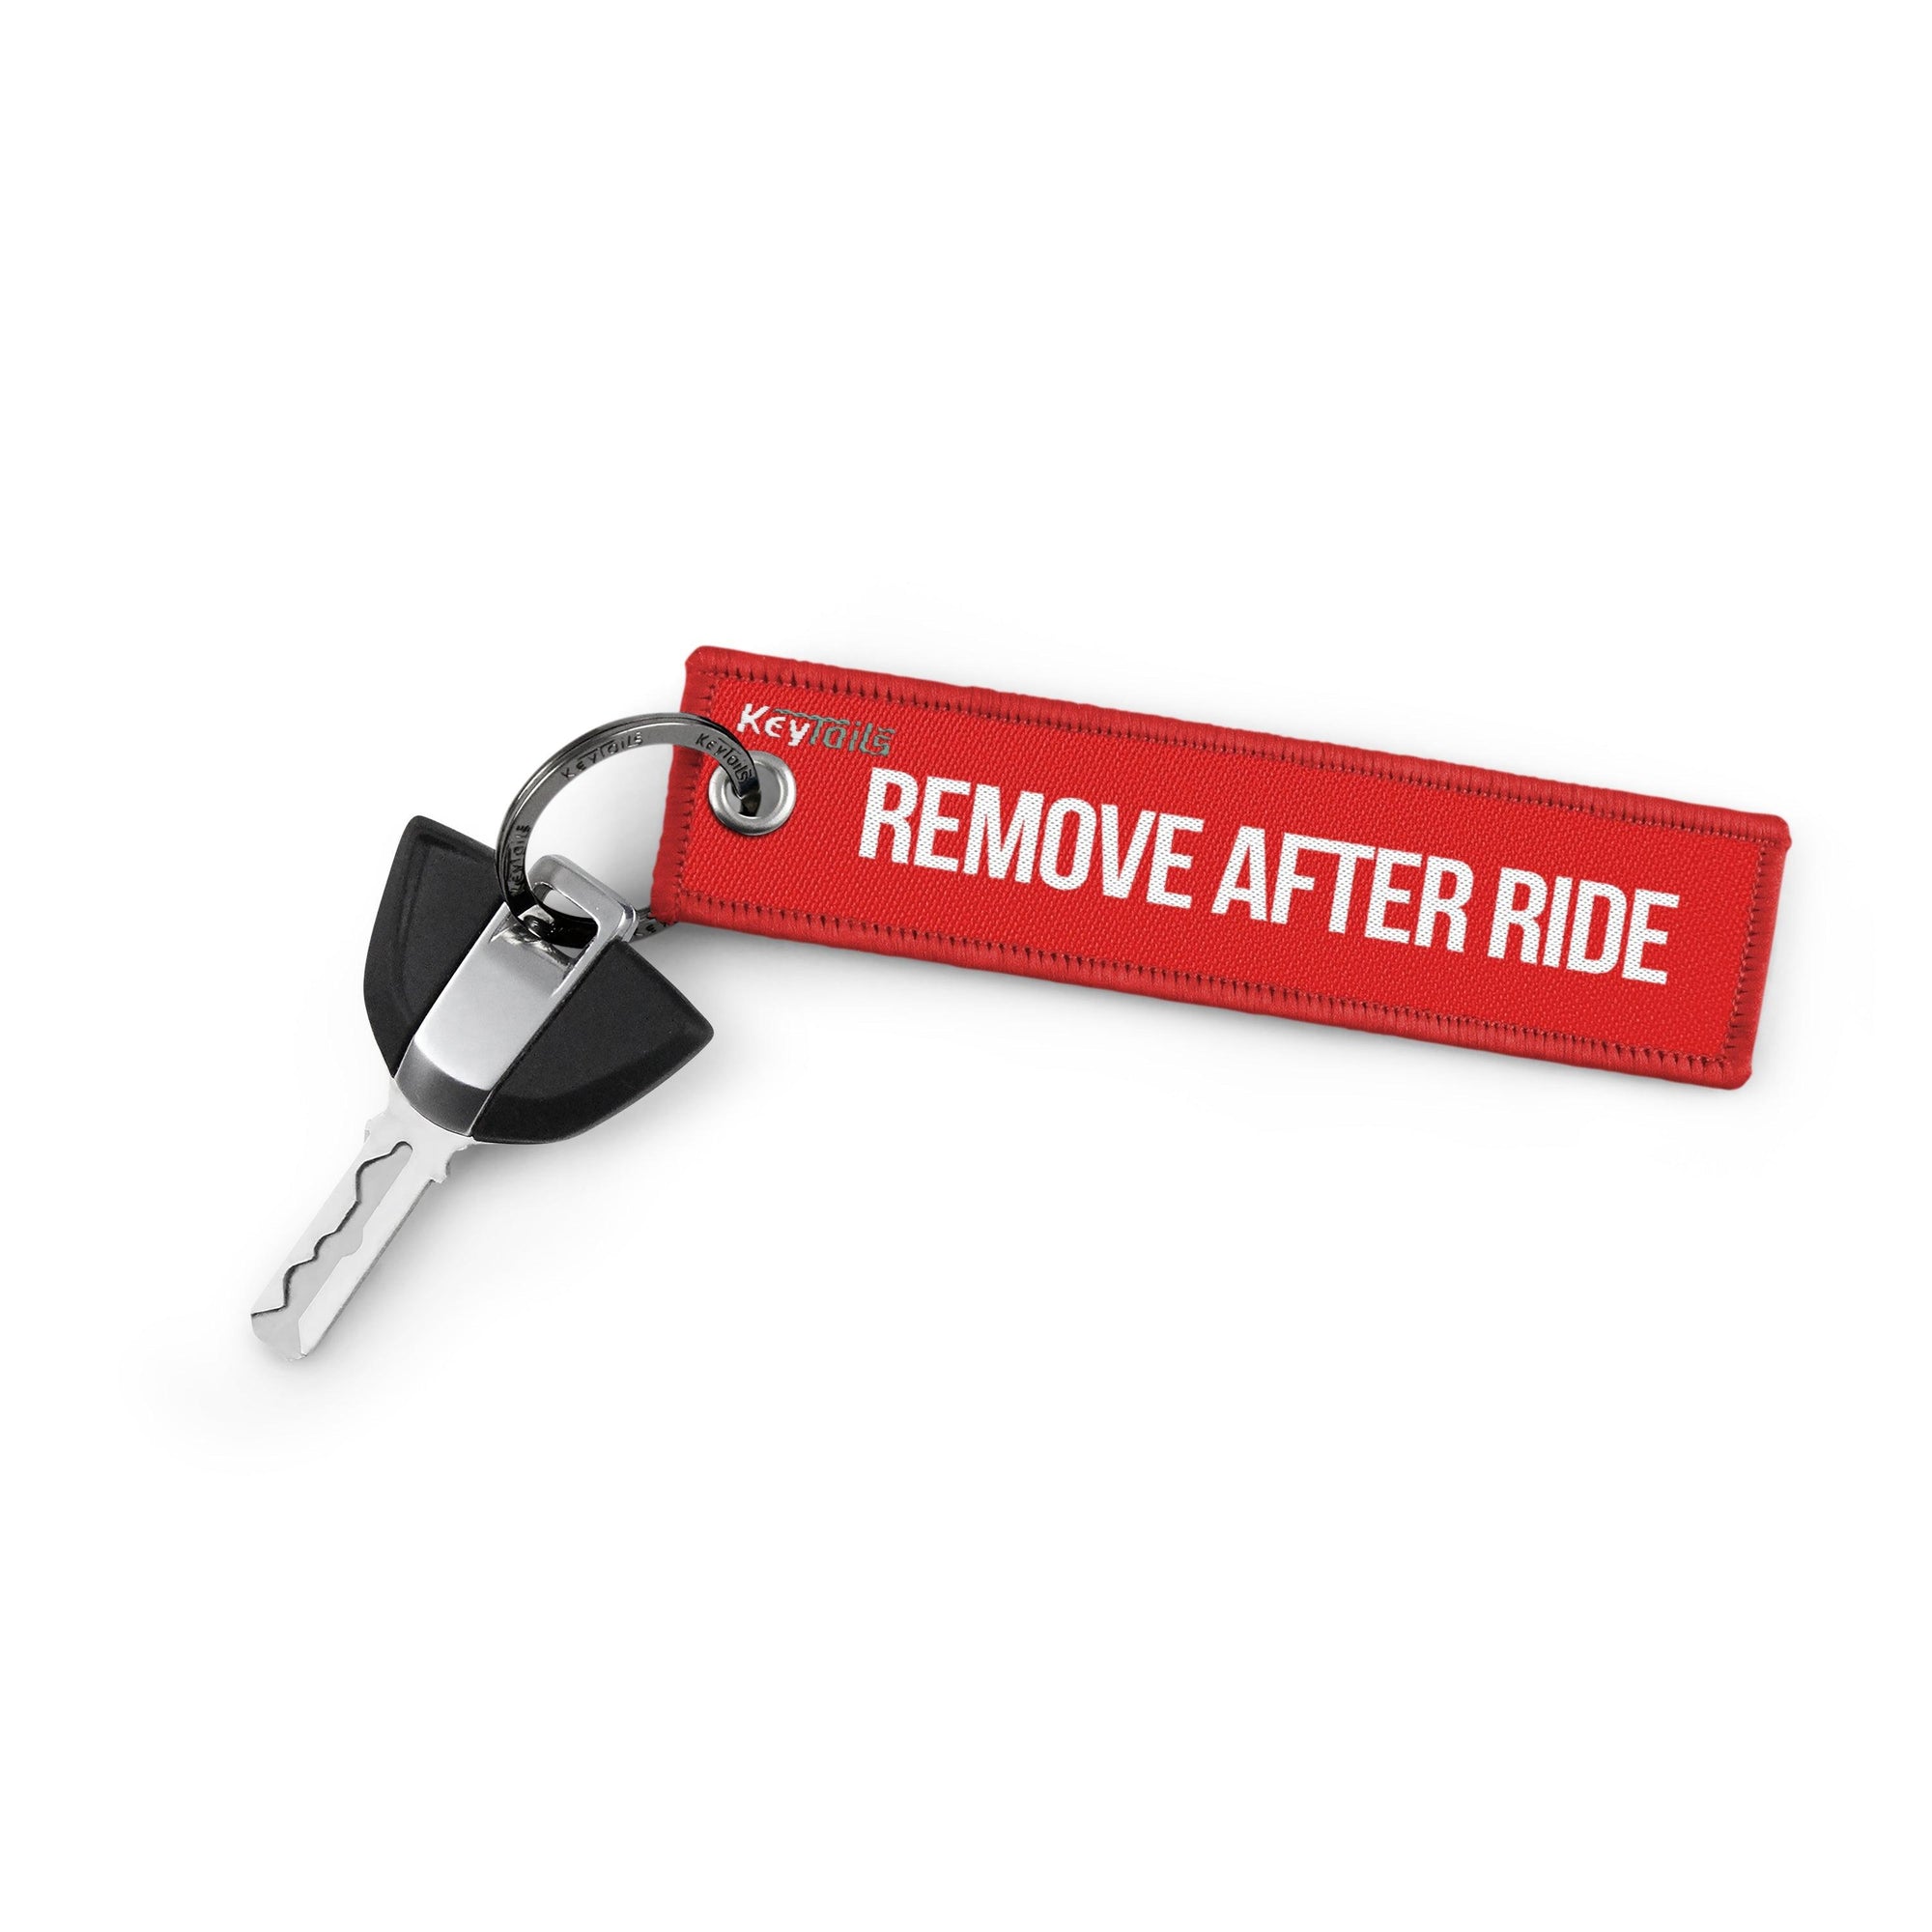 Remove After Ride